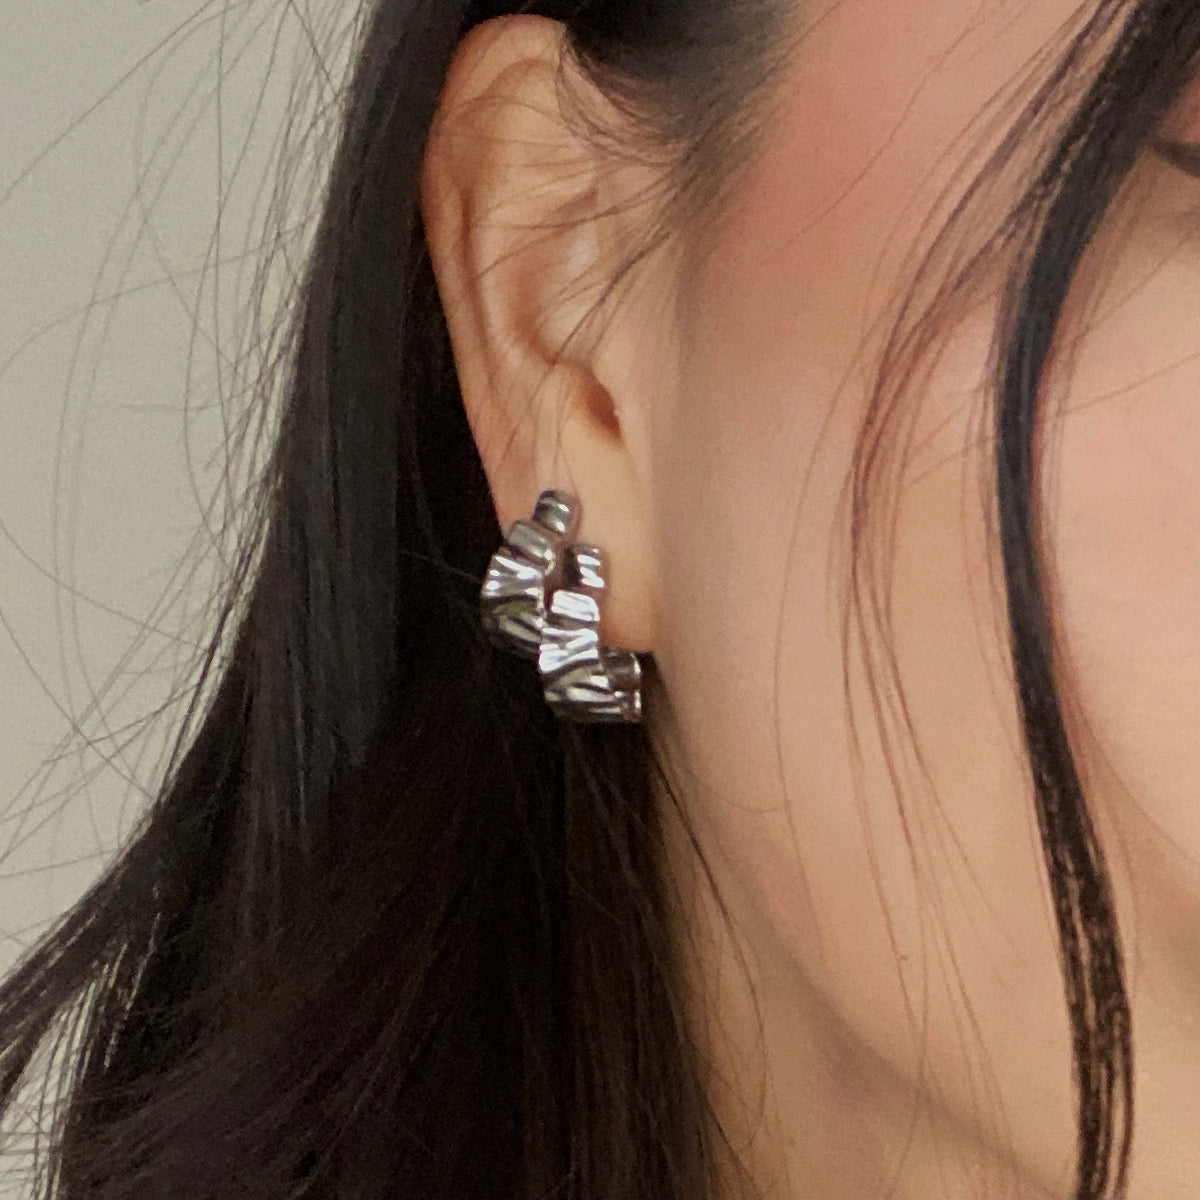 Shop these silver crinkle hoop earrings featuring a crinkle design with a push back for closure. 925 sterling silver hoop earrings.